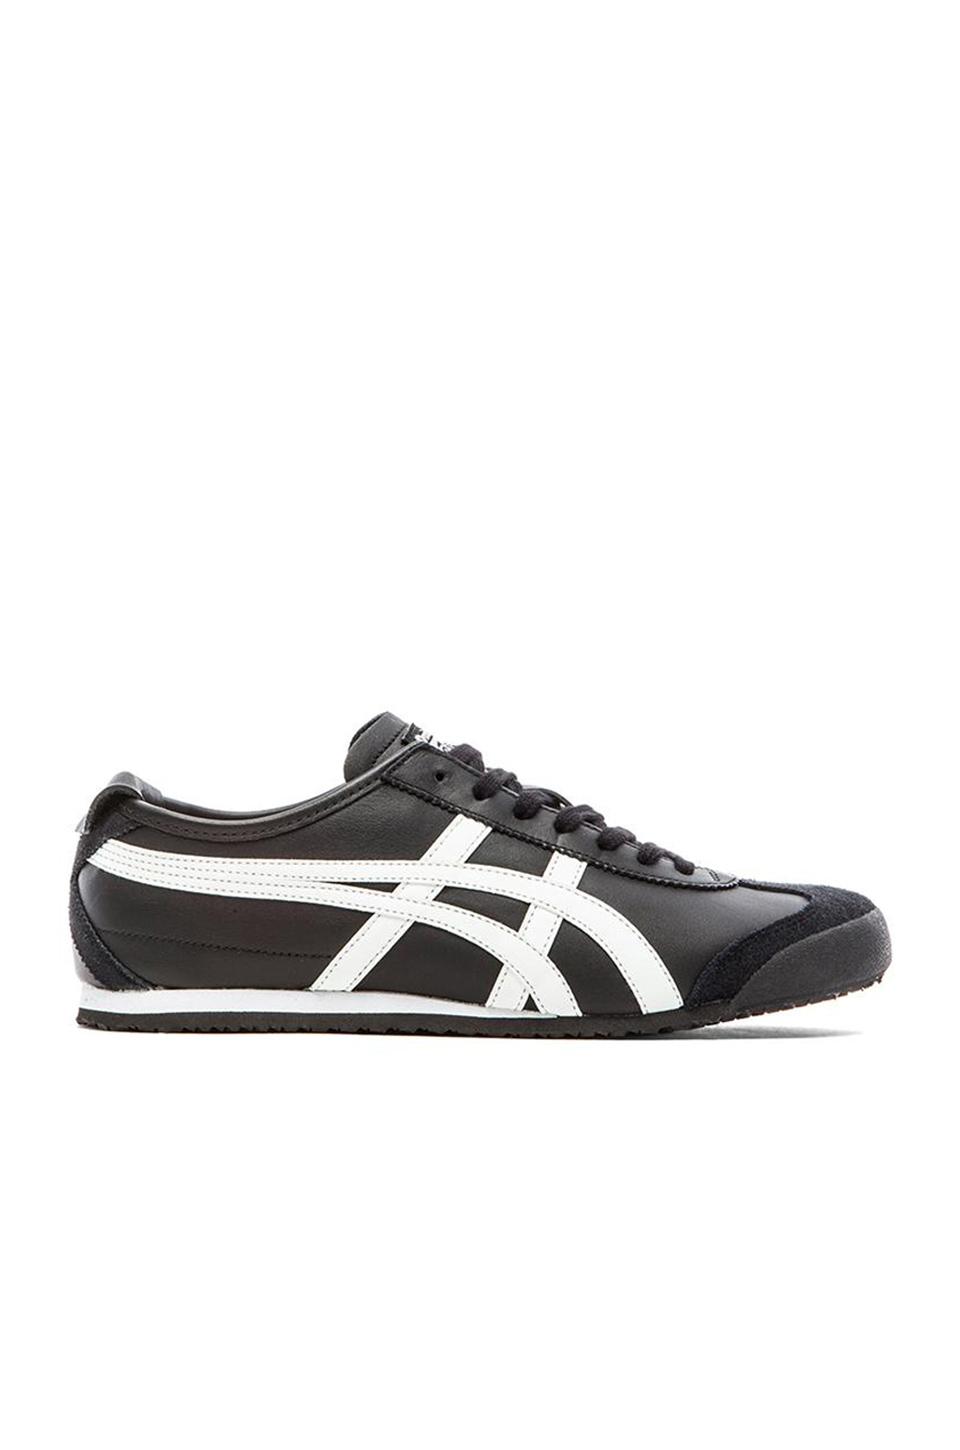 Lyst - Onitsuka Tiger Mexico 66 in Black for Men